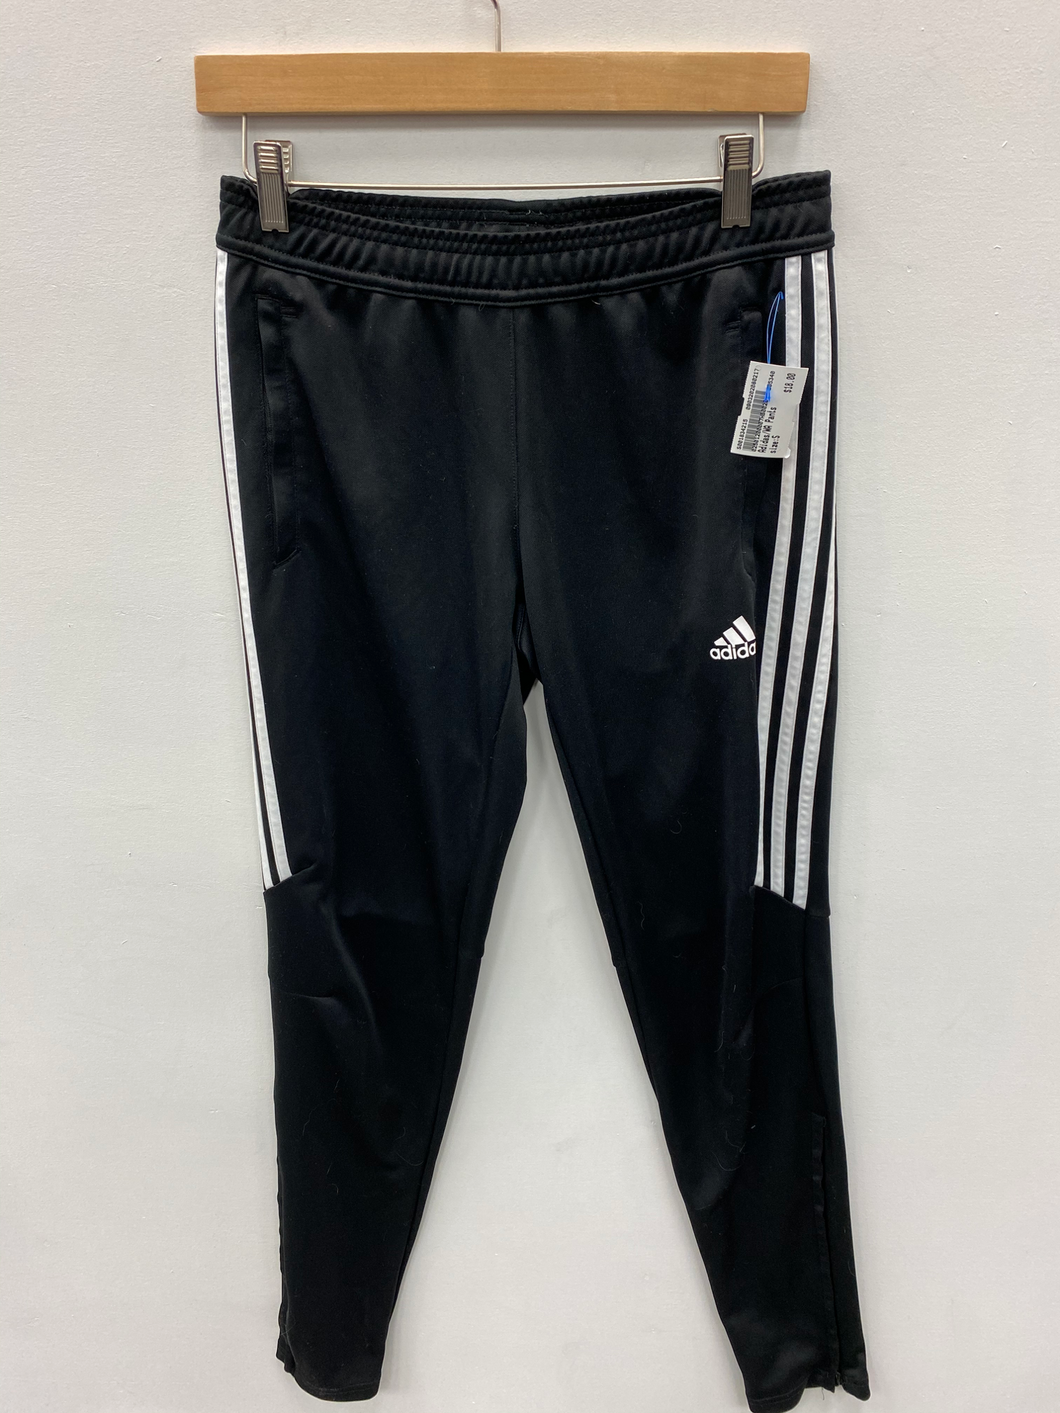 Adidas Athletic Pants Size Small